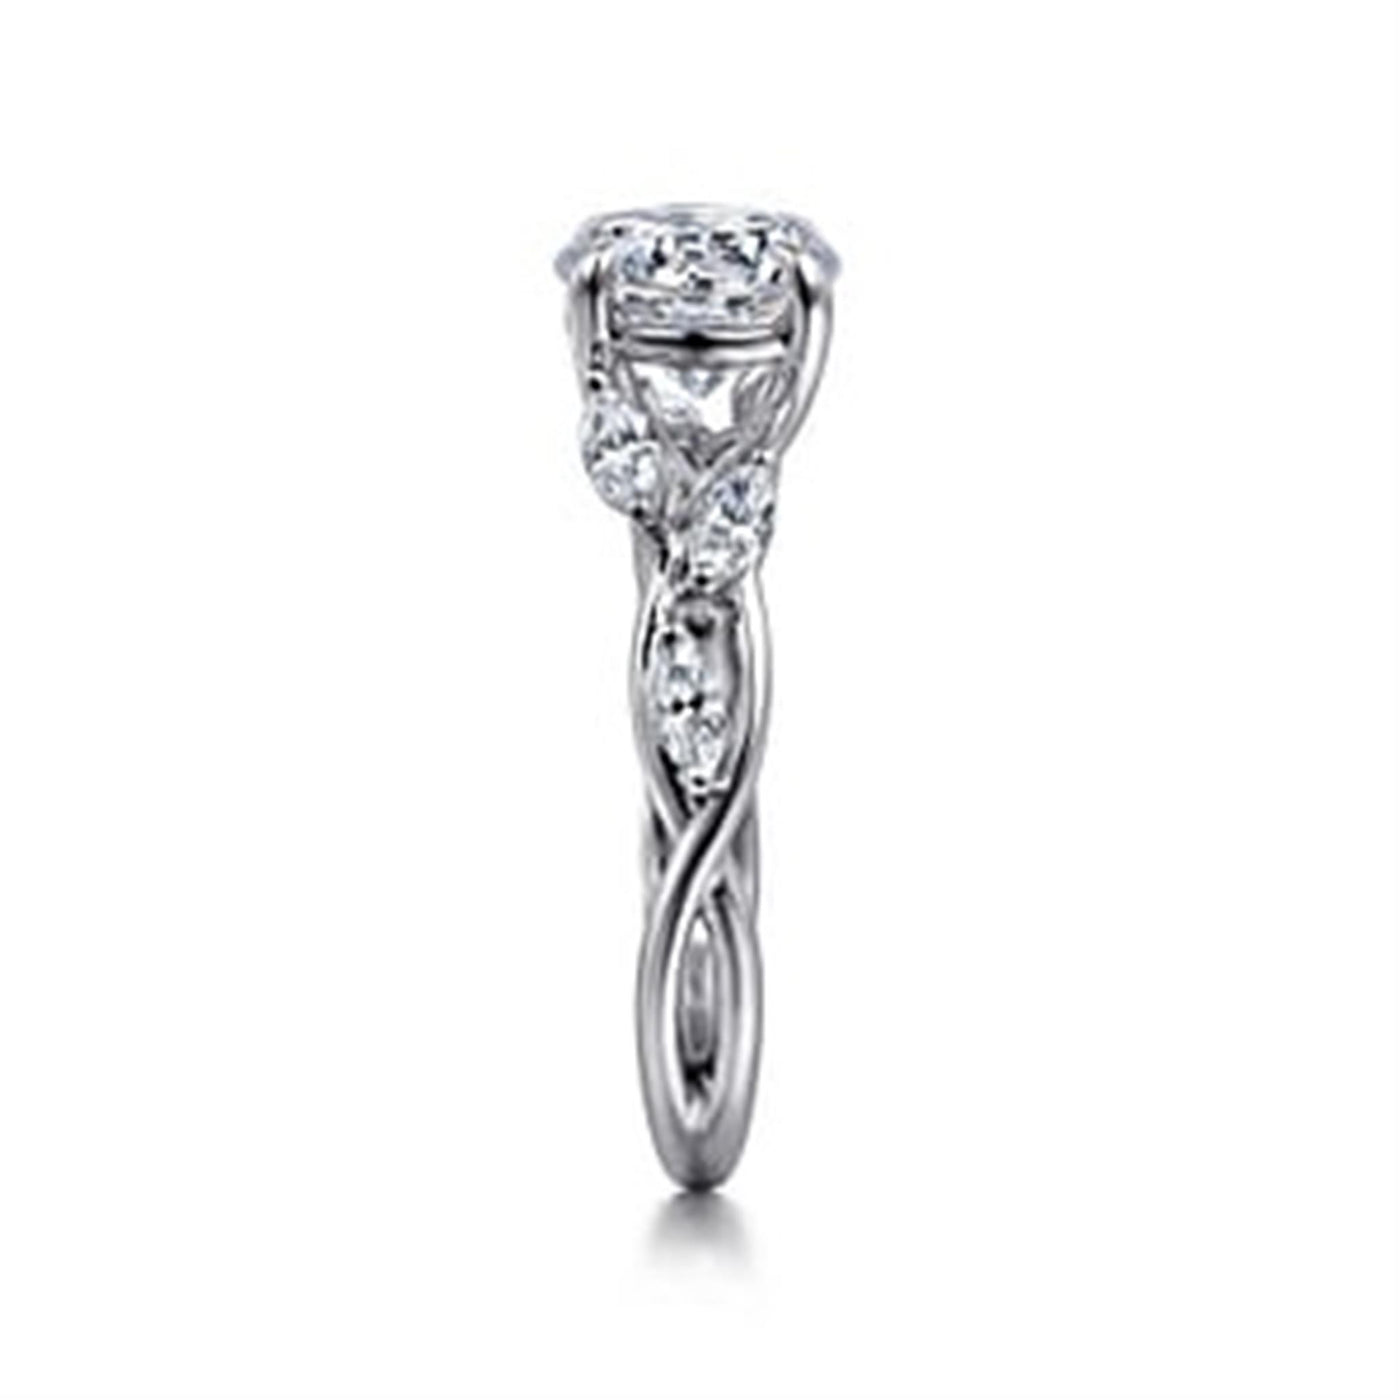 Gabriel - Floral Collection 14K White Gold 0.35ctw 4 Prong Style Diamond Semi-Mount Engagement Ring